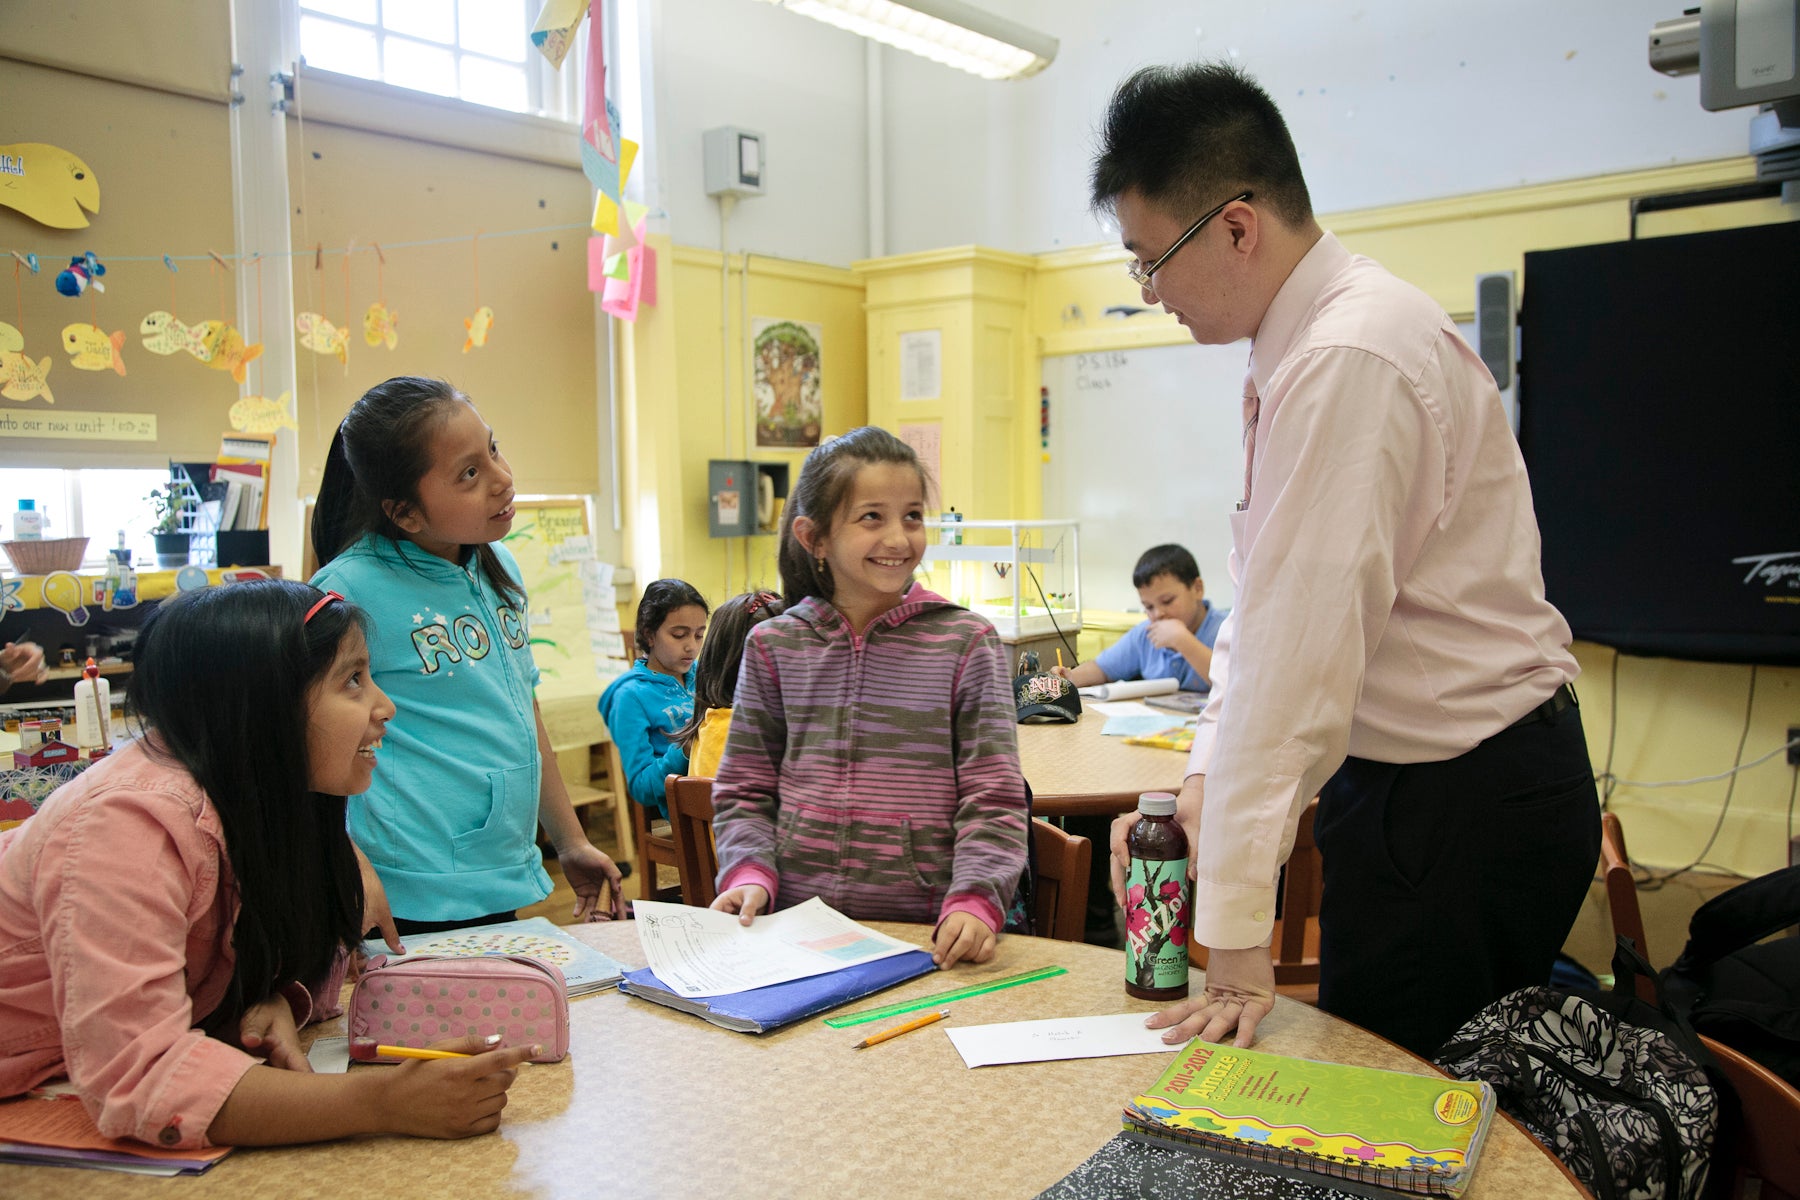 A school principal engages with students in class.